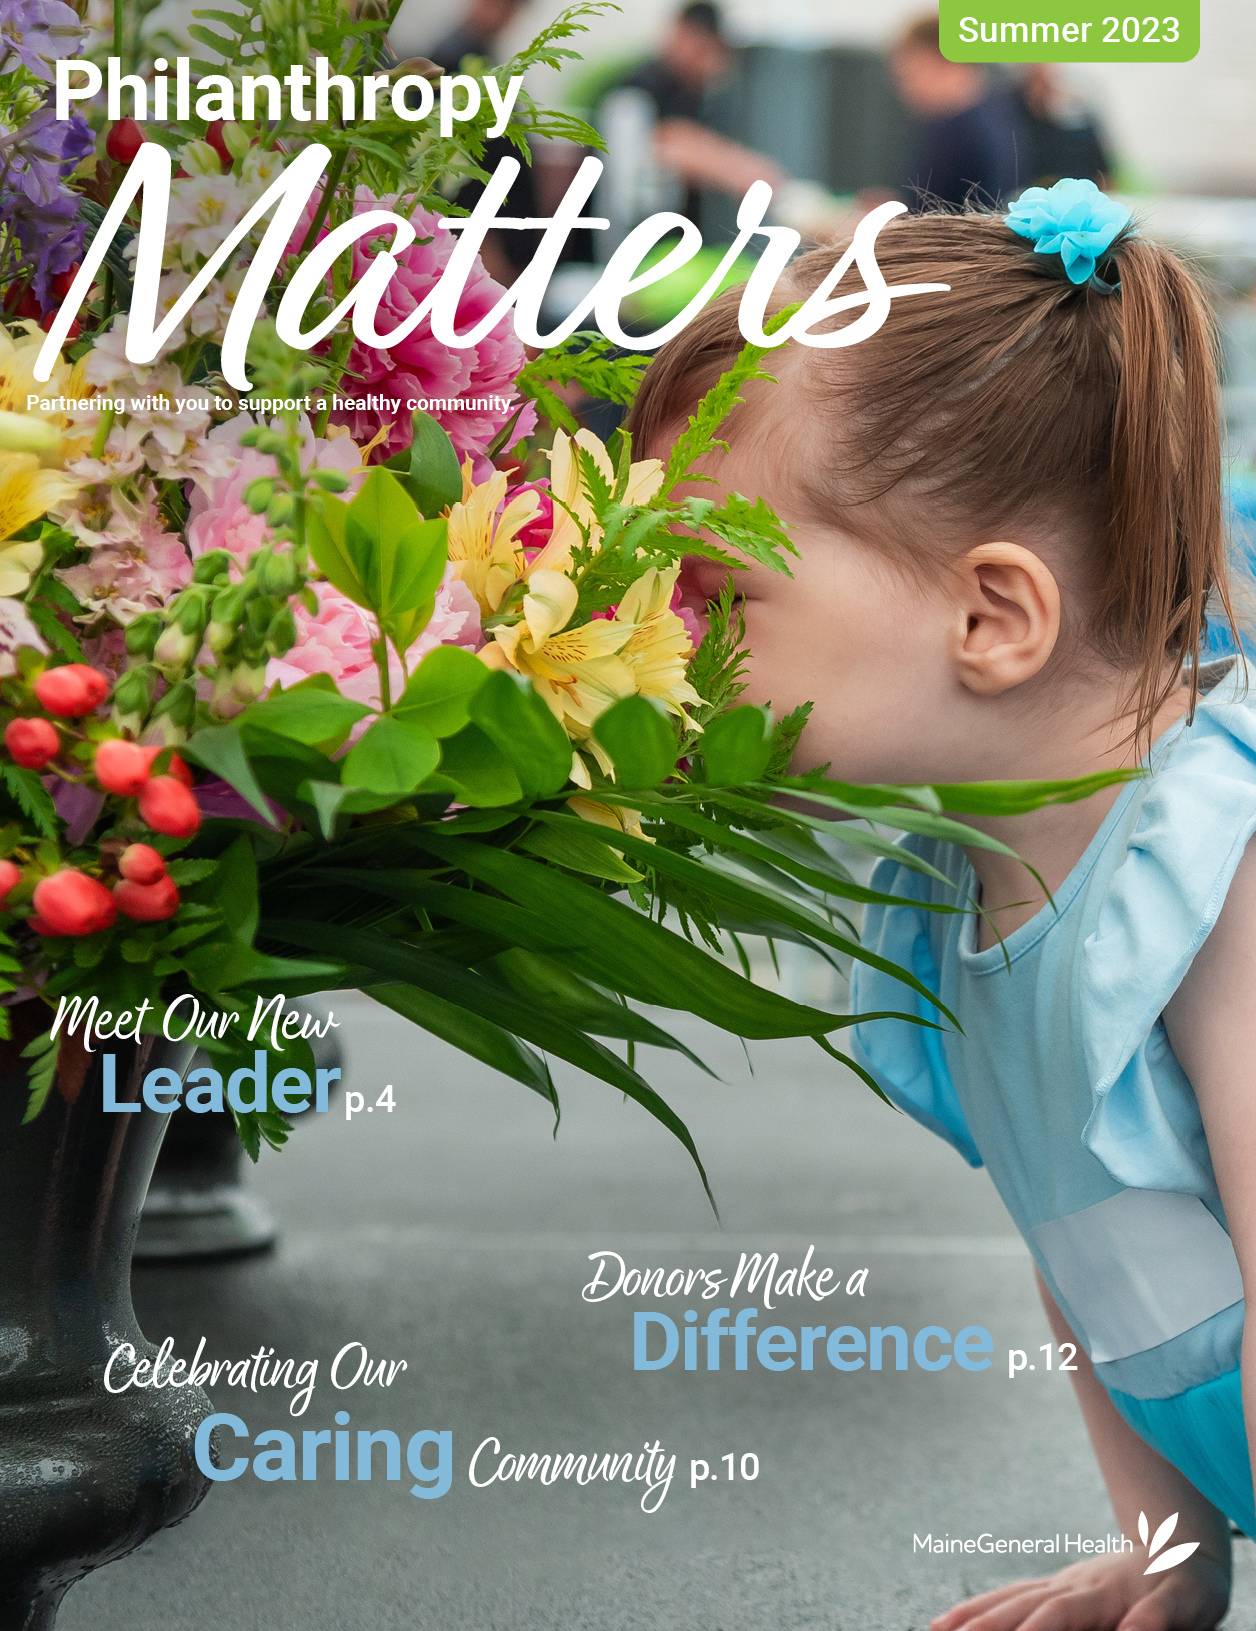 MaineGeneral Health's Philanthropy Matters Summer 2023 front magazine cover. Headlines: Meet Our New Leader page 4. Celebrating Our Caring Community page 10. Donors Make a Difference page 12. Image shows a toddler in a bright blue dress, with hair in pigtails, leaning forward to breathe in the scent of a brightly-colored floral arrangement, burying her face in the blooms. The image is from the 2023 President's Circle event, which honored retiring CEO Chuck Hays, and the toddler is his grandchild.